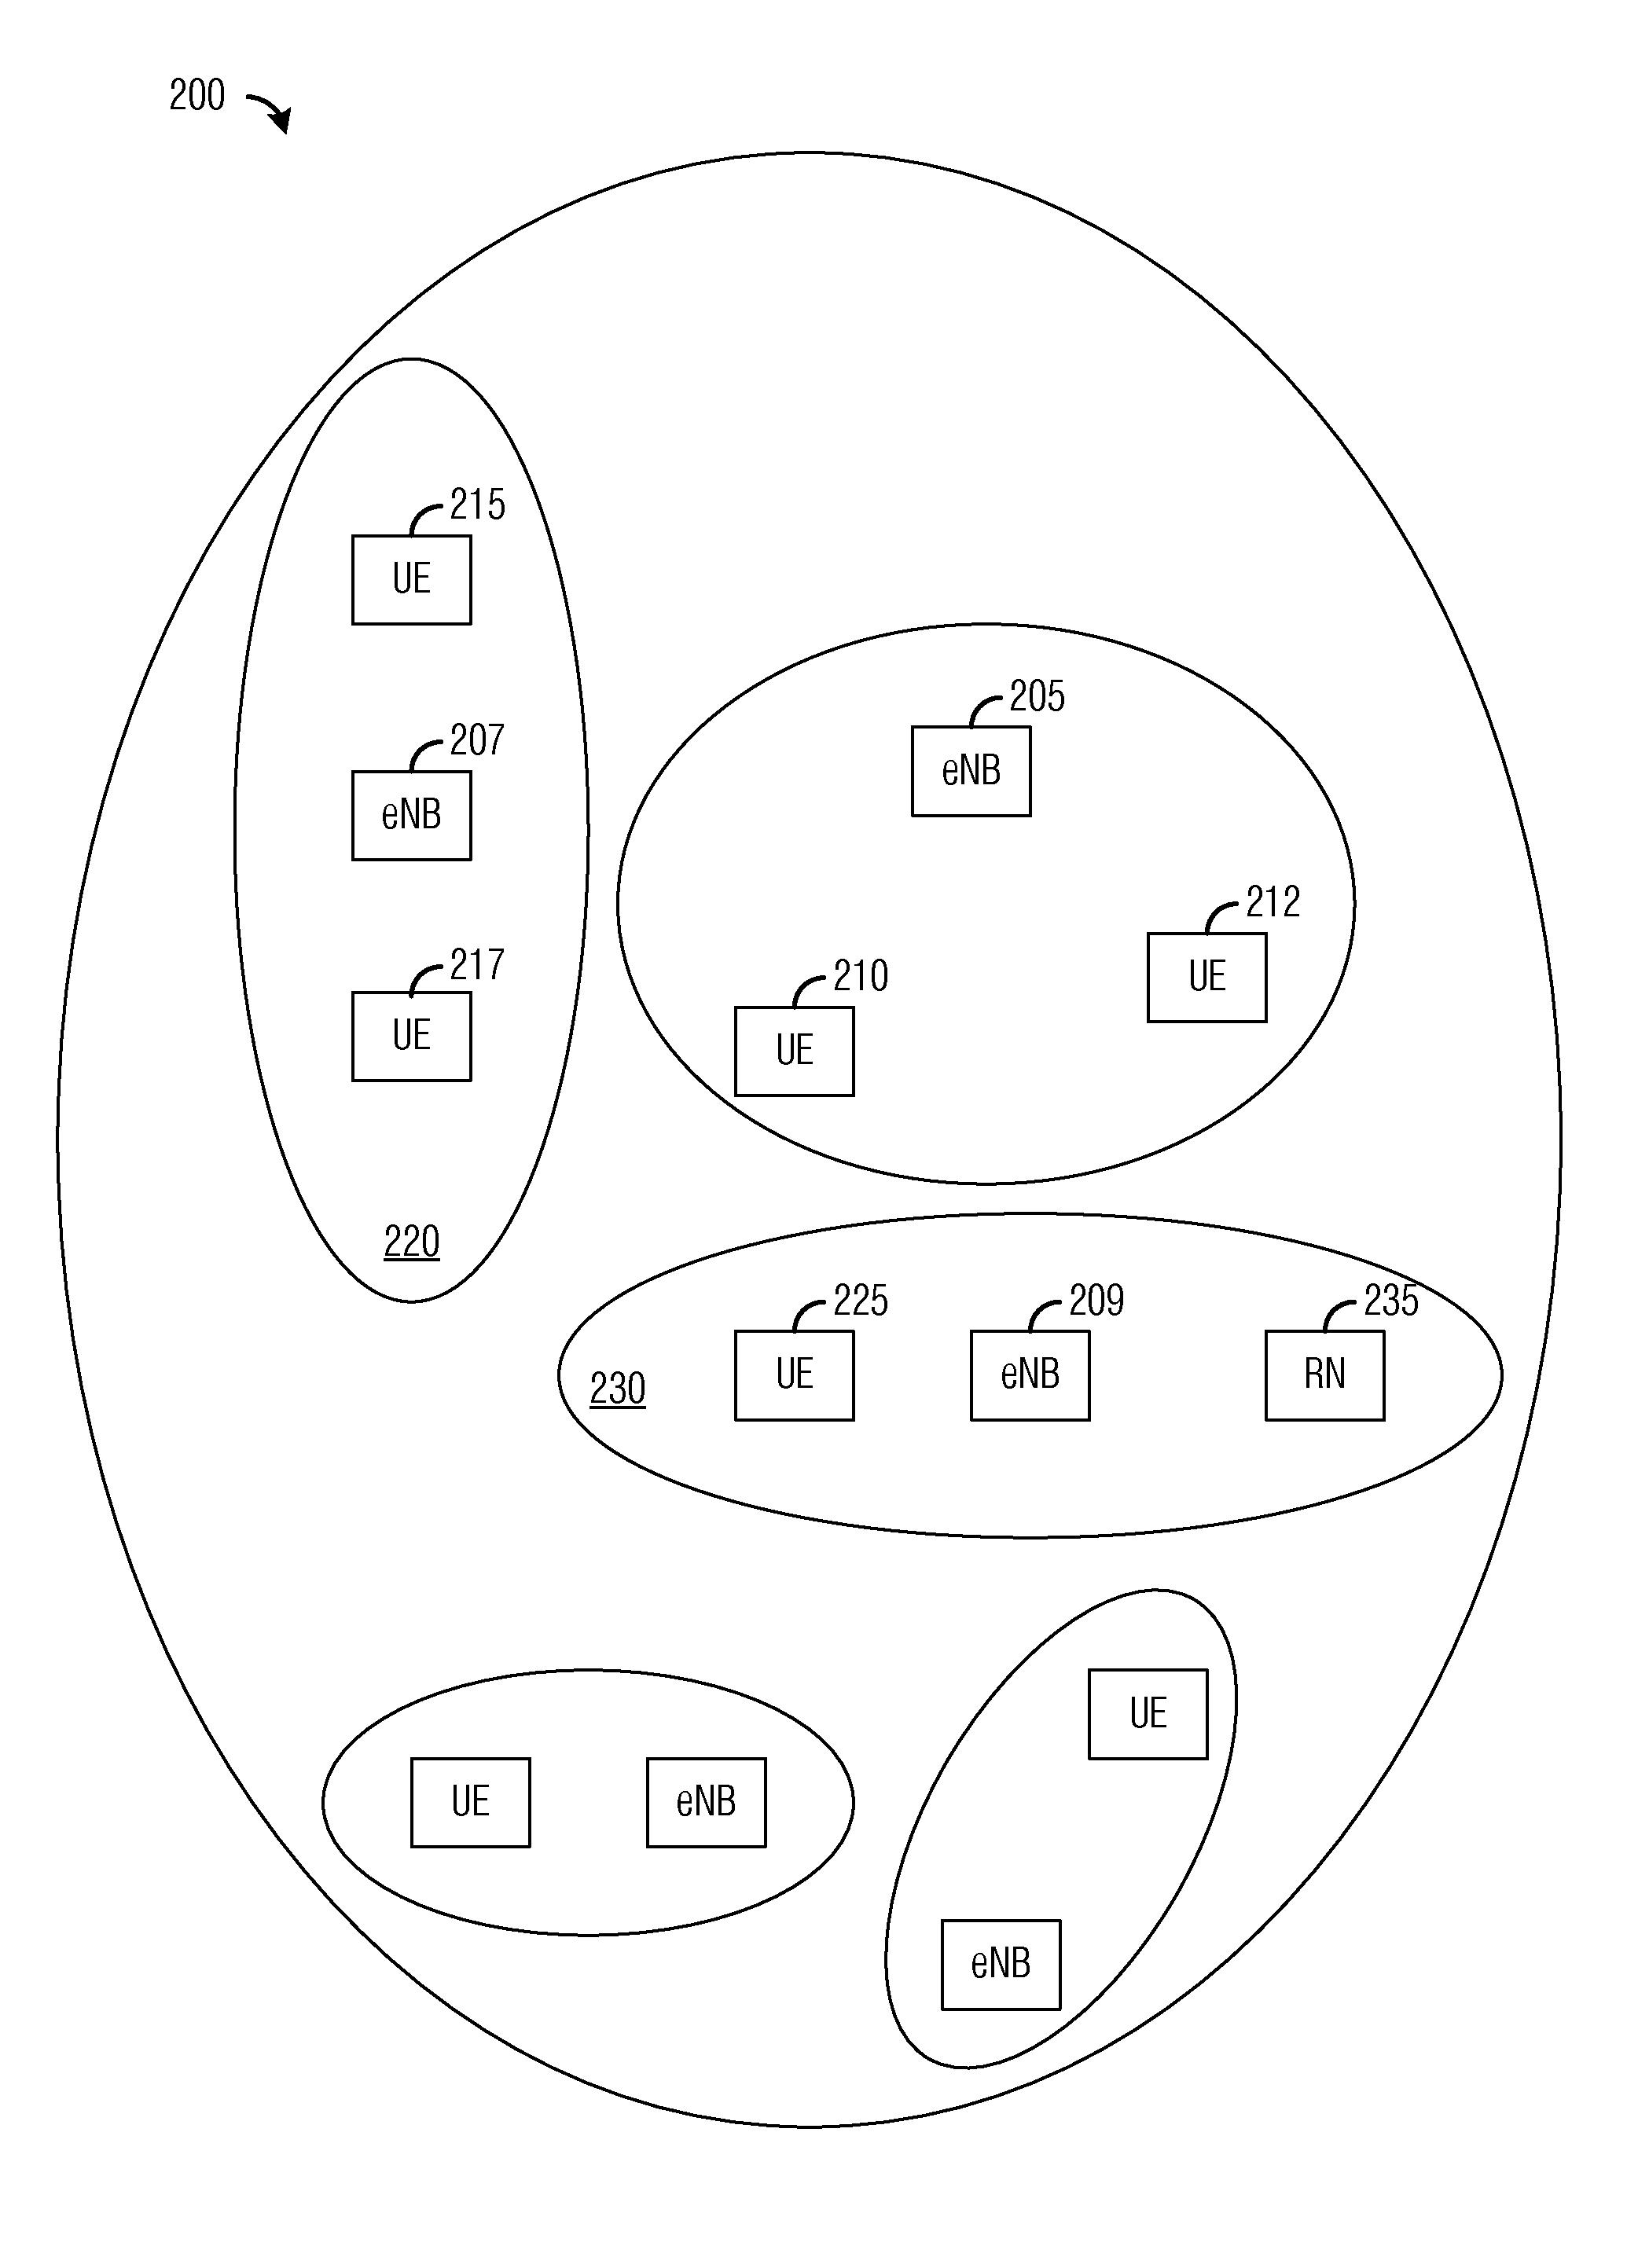 System and Method for Configuring a Communications Network